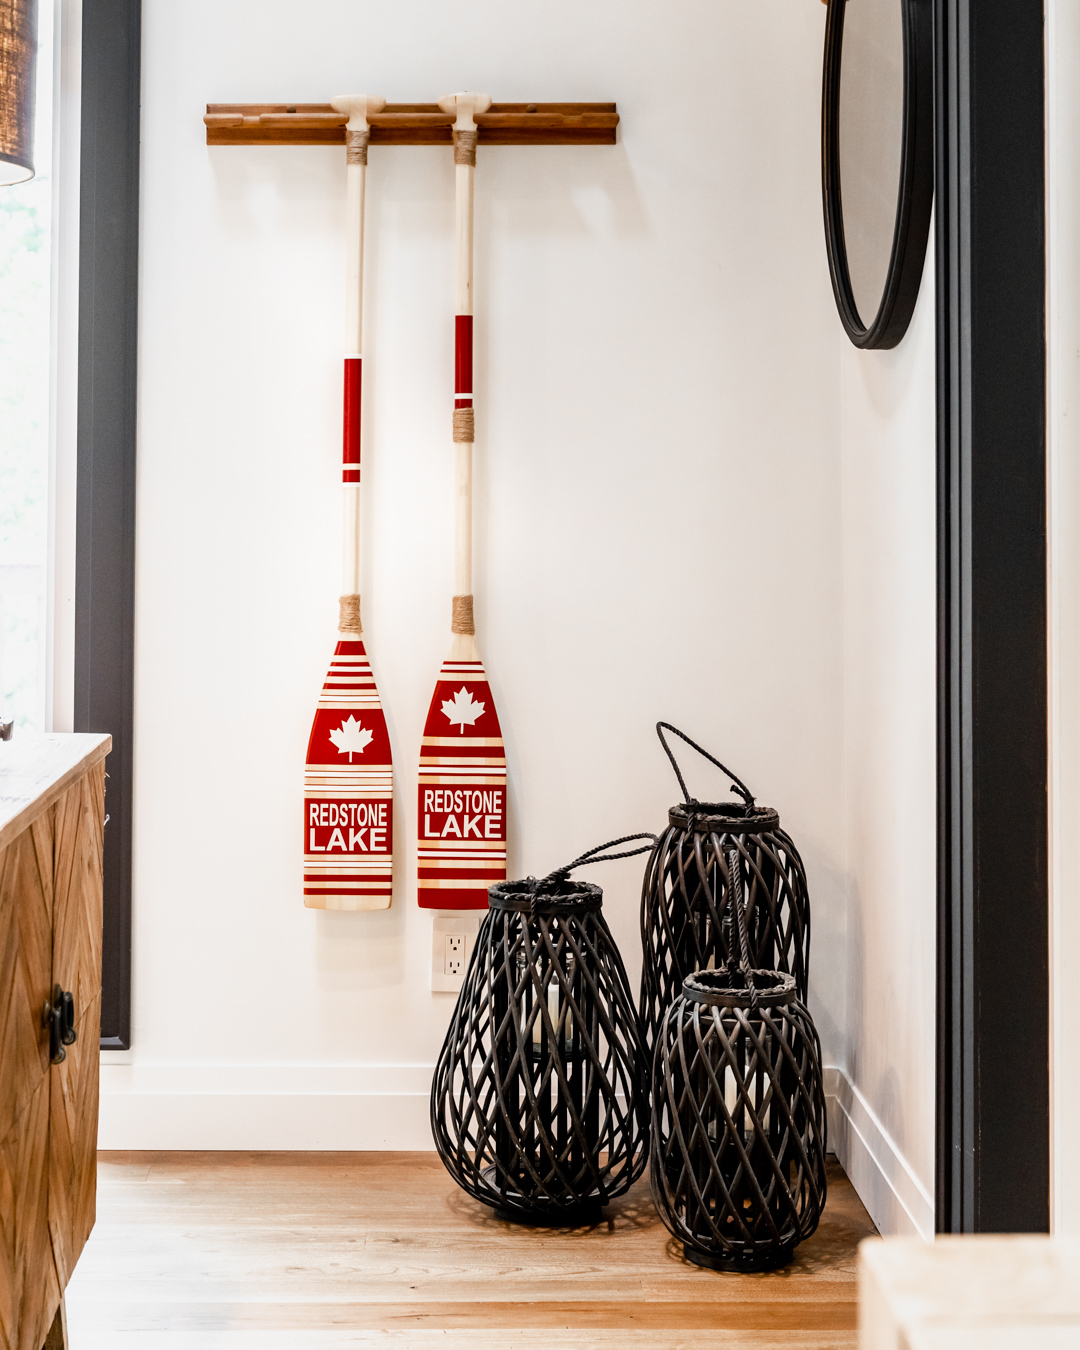 redstone lake red and white oars on wall, three black vessels on floor